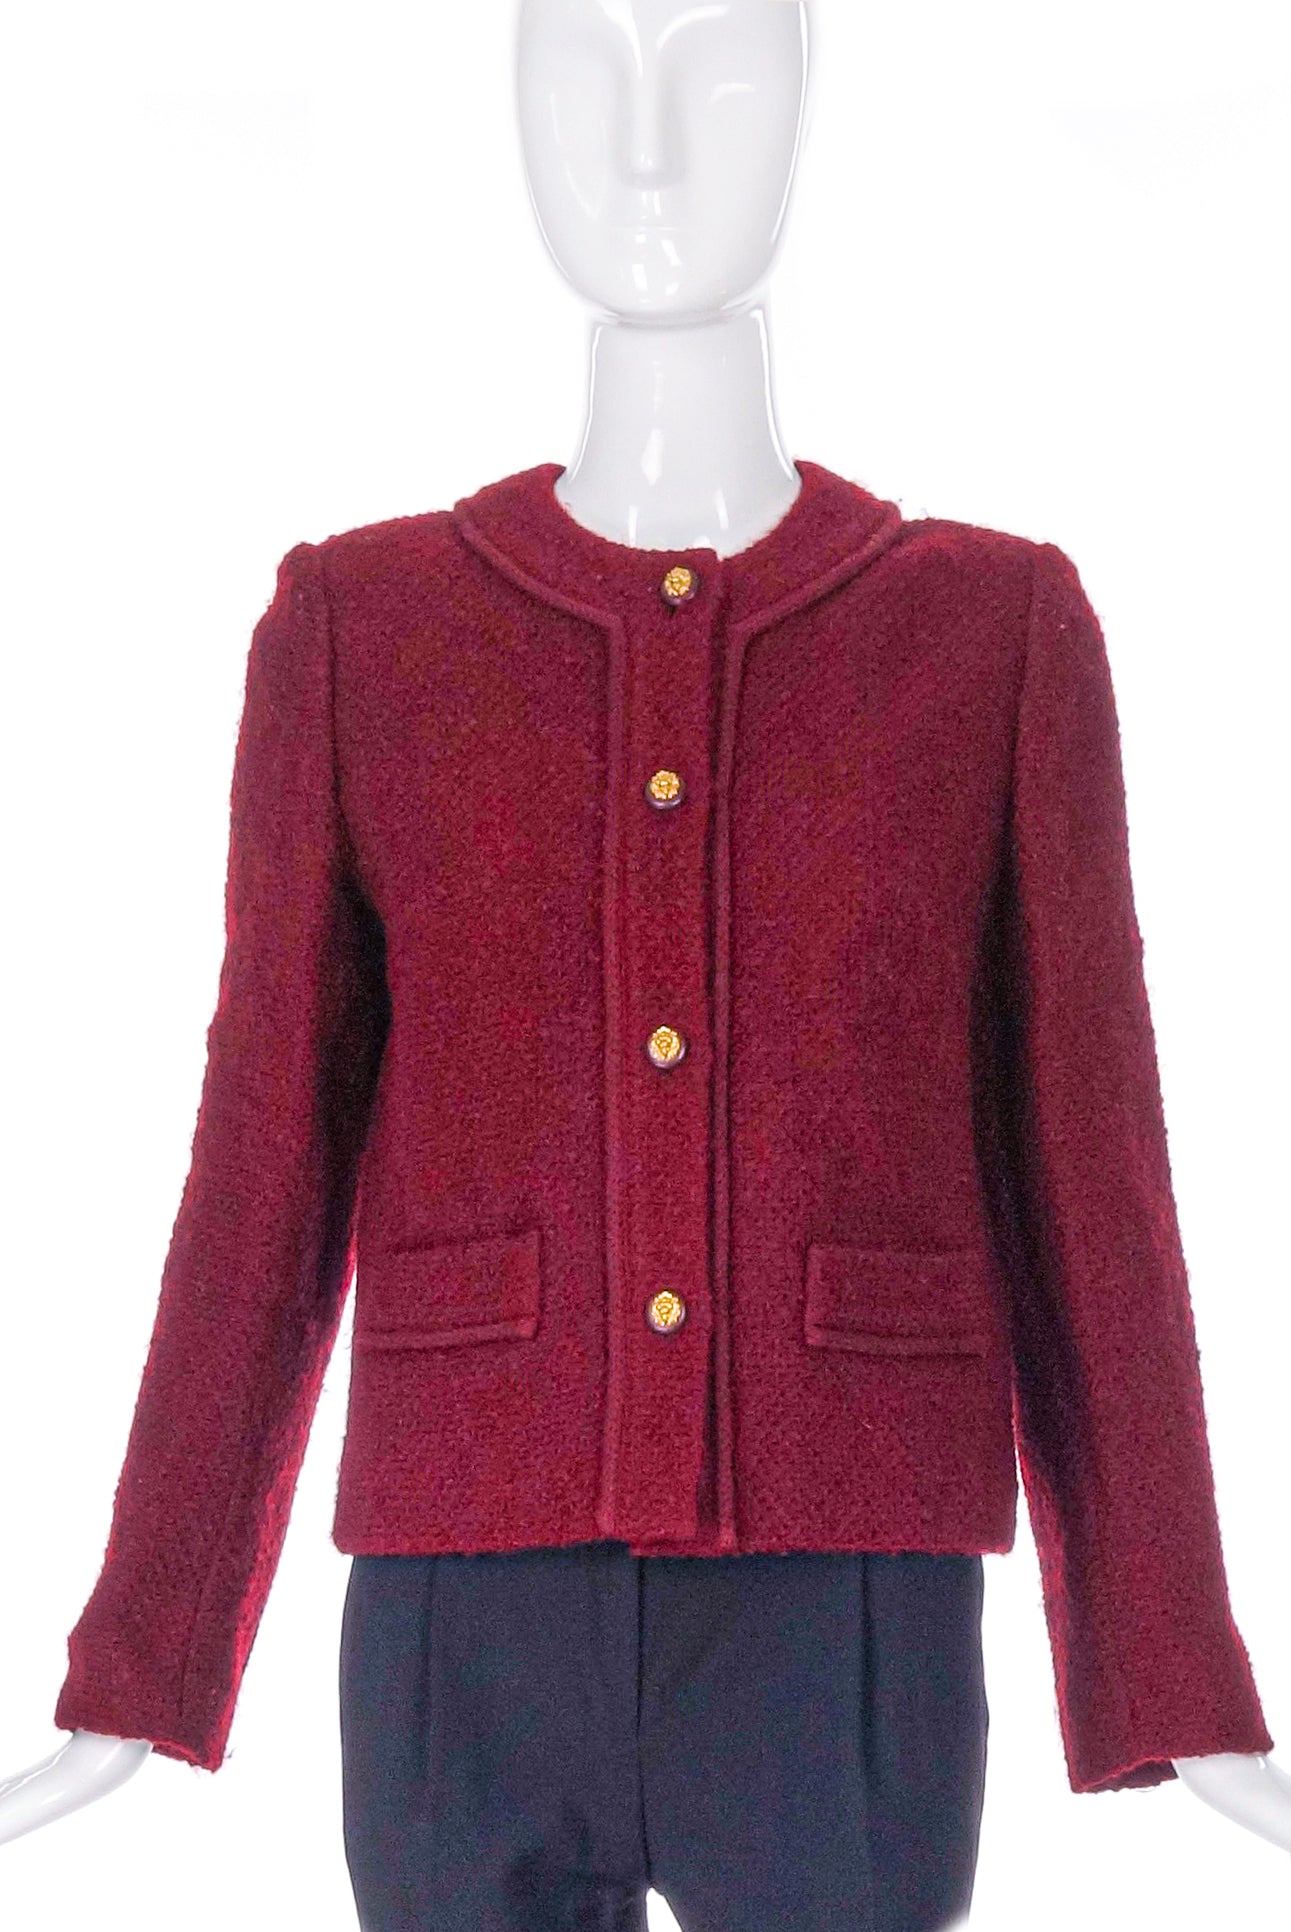 Chanel Burgundy Classic Tweed Jacket with Gold Lion Buttons